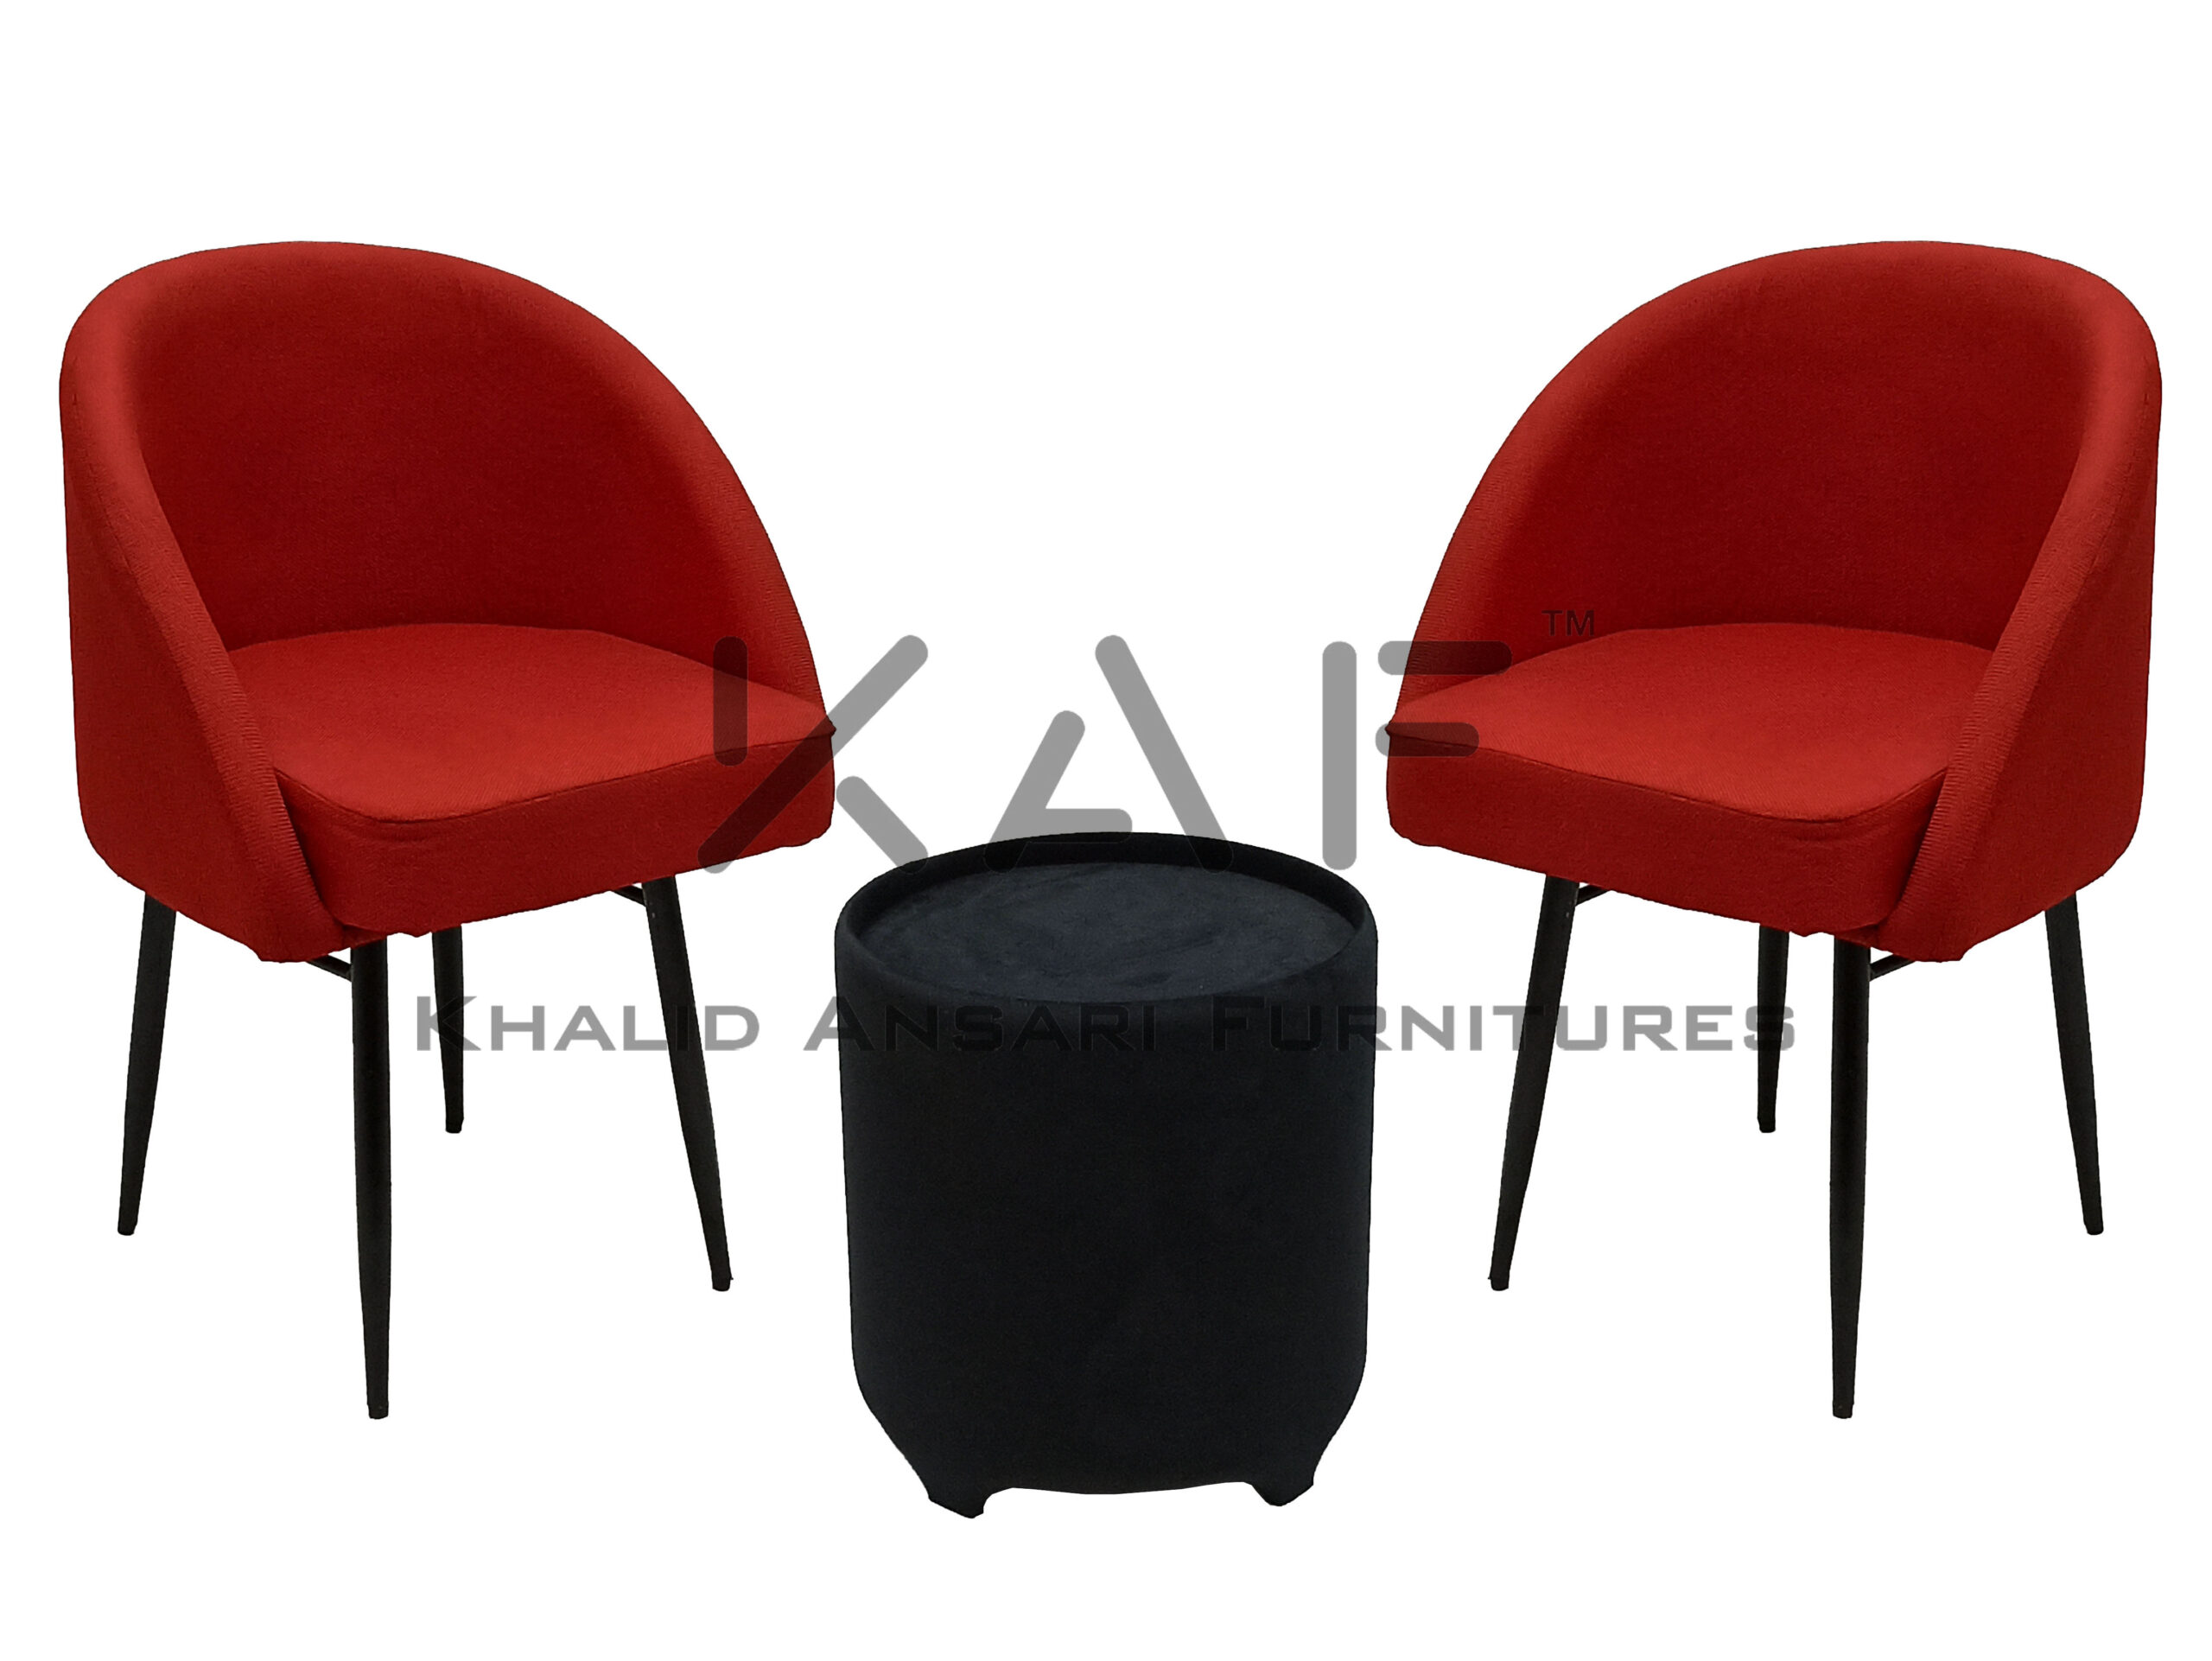 Bed Room Premium Chair Slope Arm Design Red Jute Fabric set with Black Velvet Tea Table - 2 Chairs + 1 Table